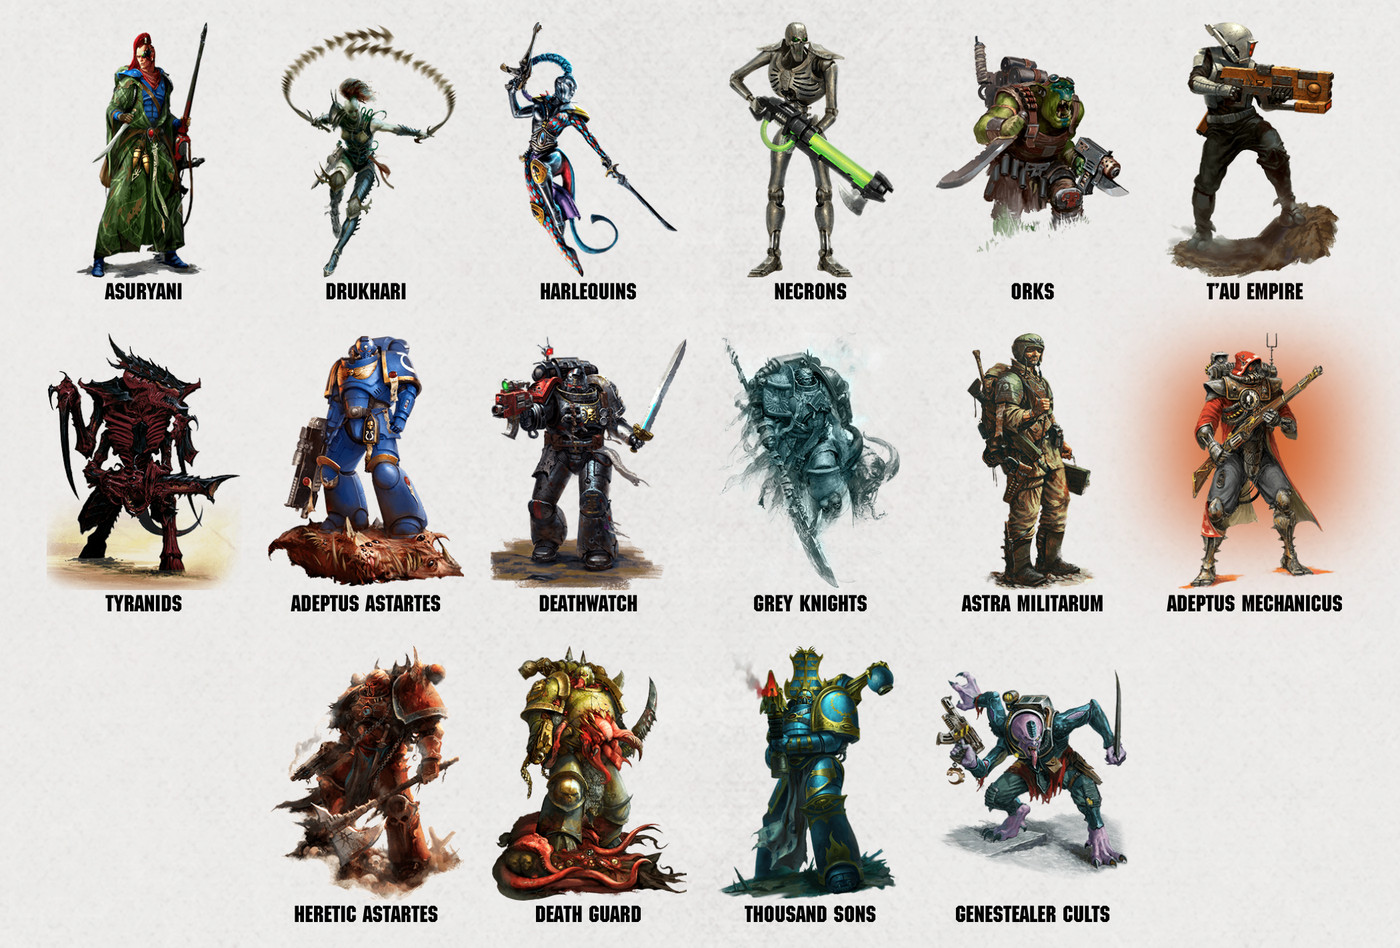 What are the different factions in Warhammer 40K?